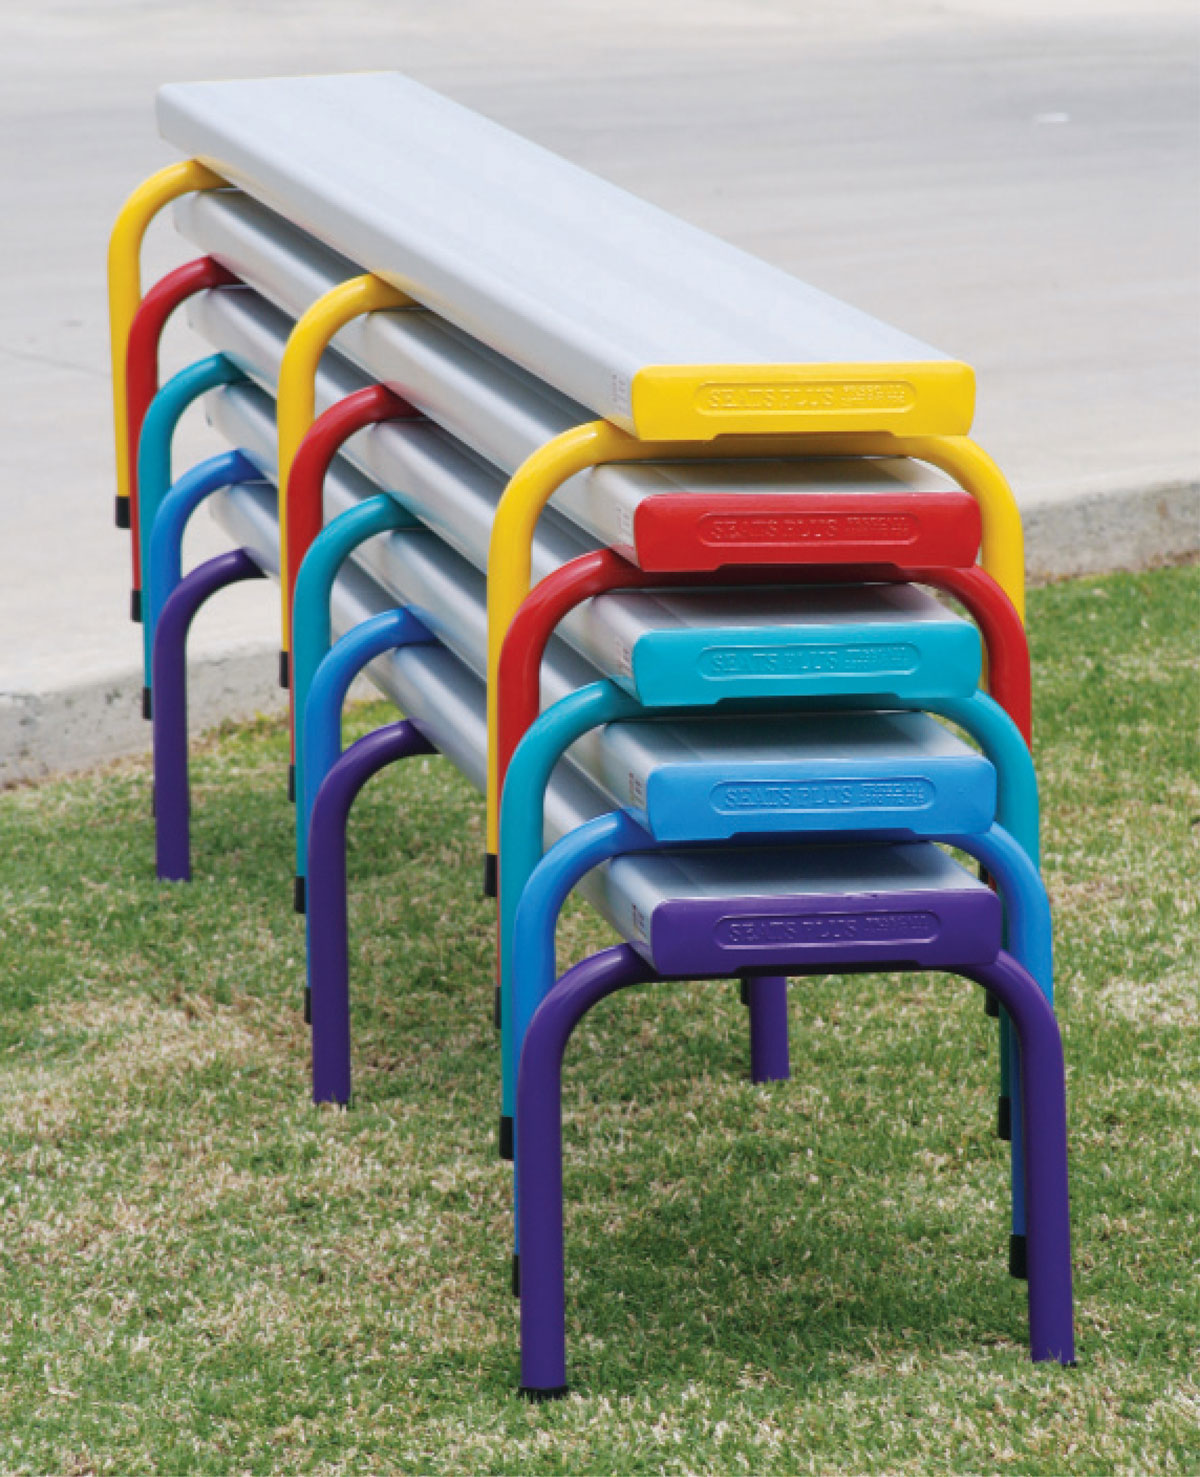 Kiddie Stackable Benches powder coated in Dulux Yellow Gold, Signal Red, Blaze Blue, Space Blue and Dark Violet